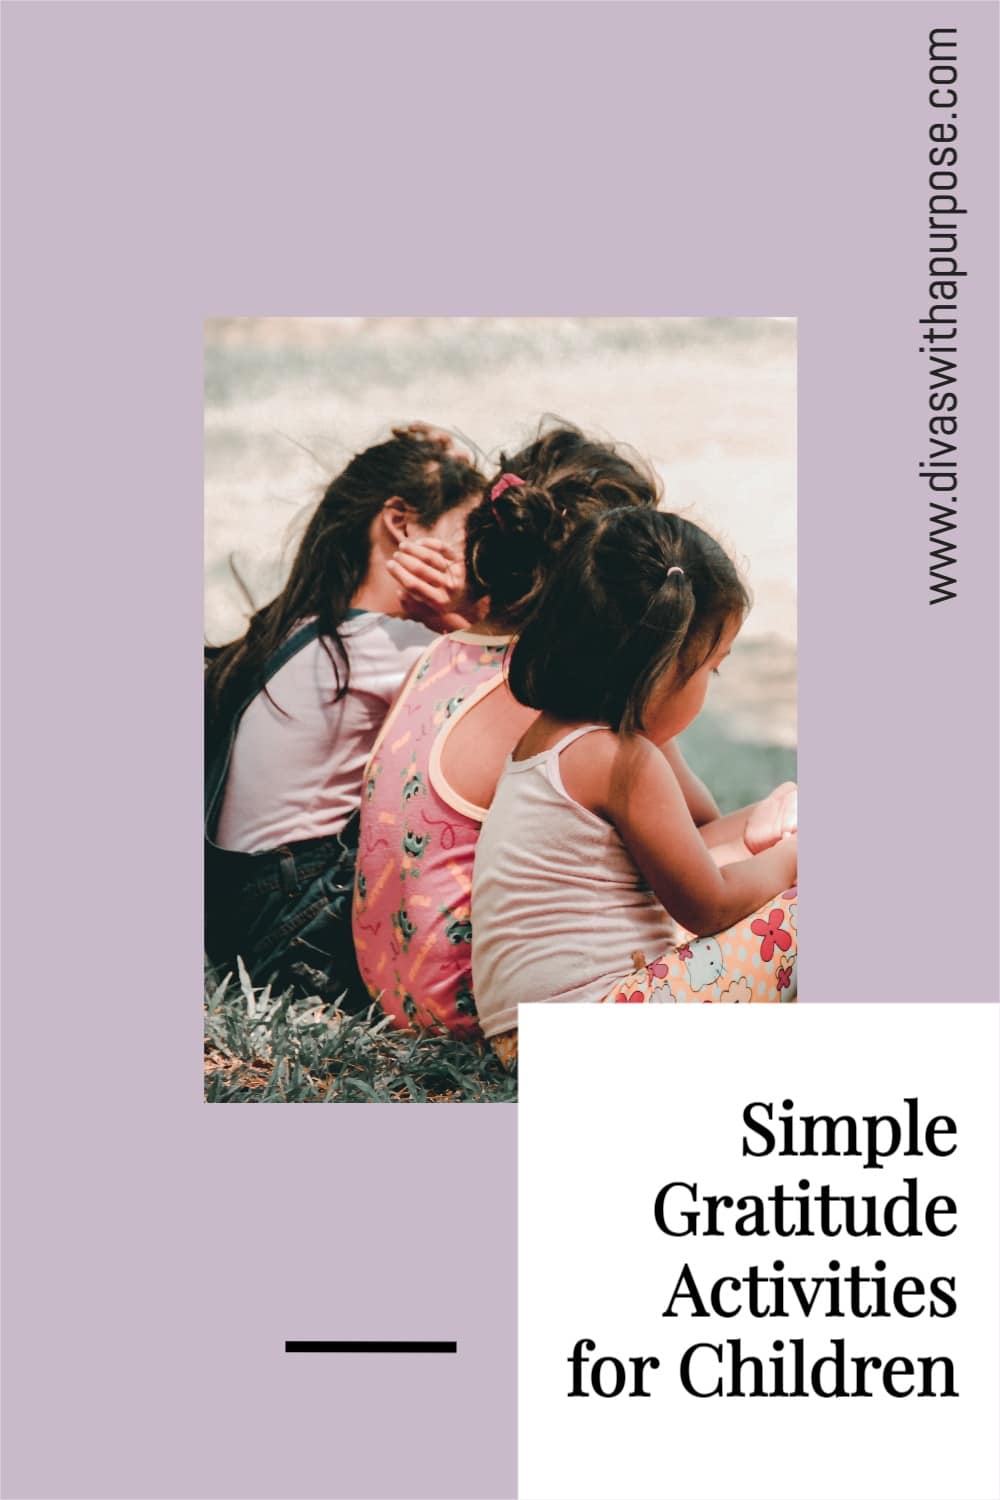 Simple Gratitude Activities for Children - a collection of printable and easy to do activities for kids to explore gratitude.